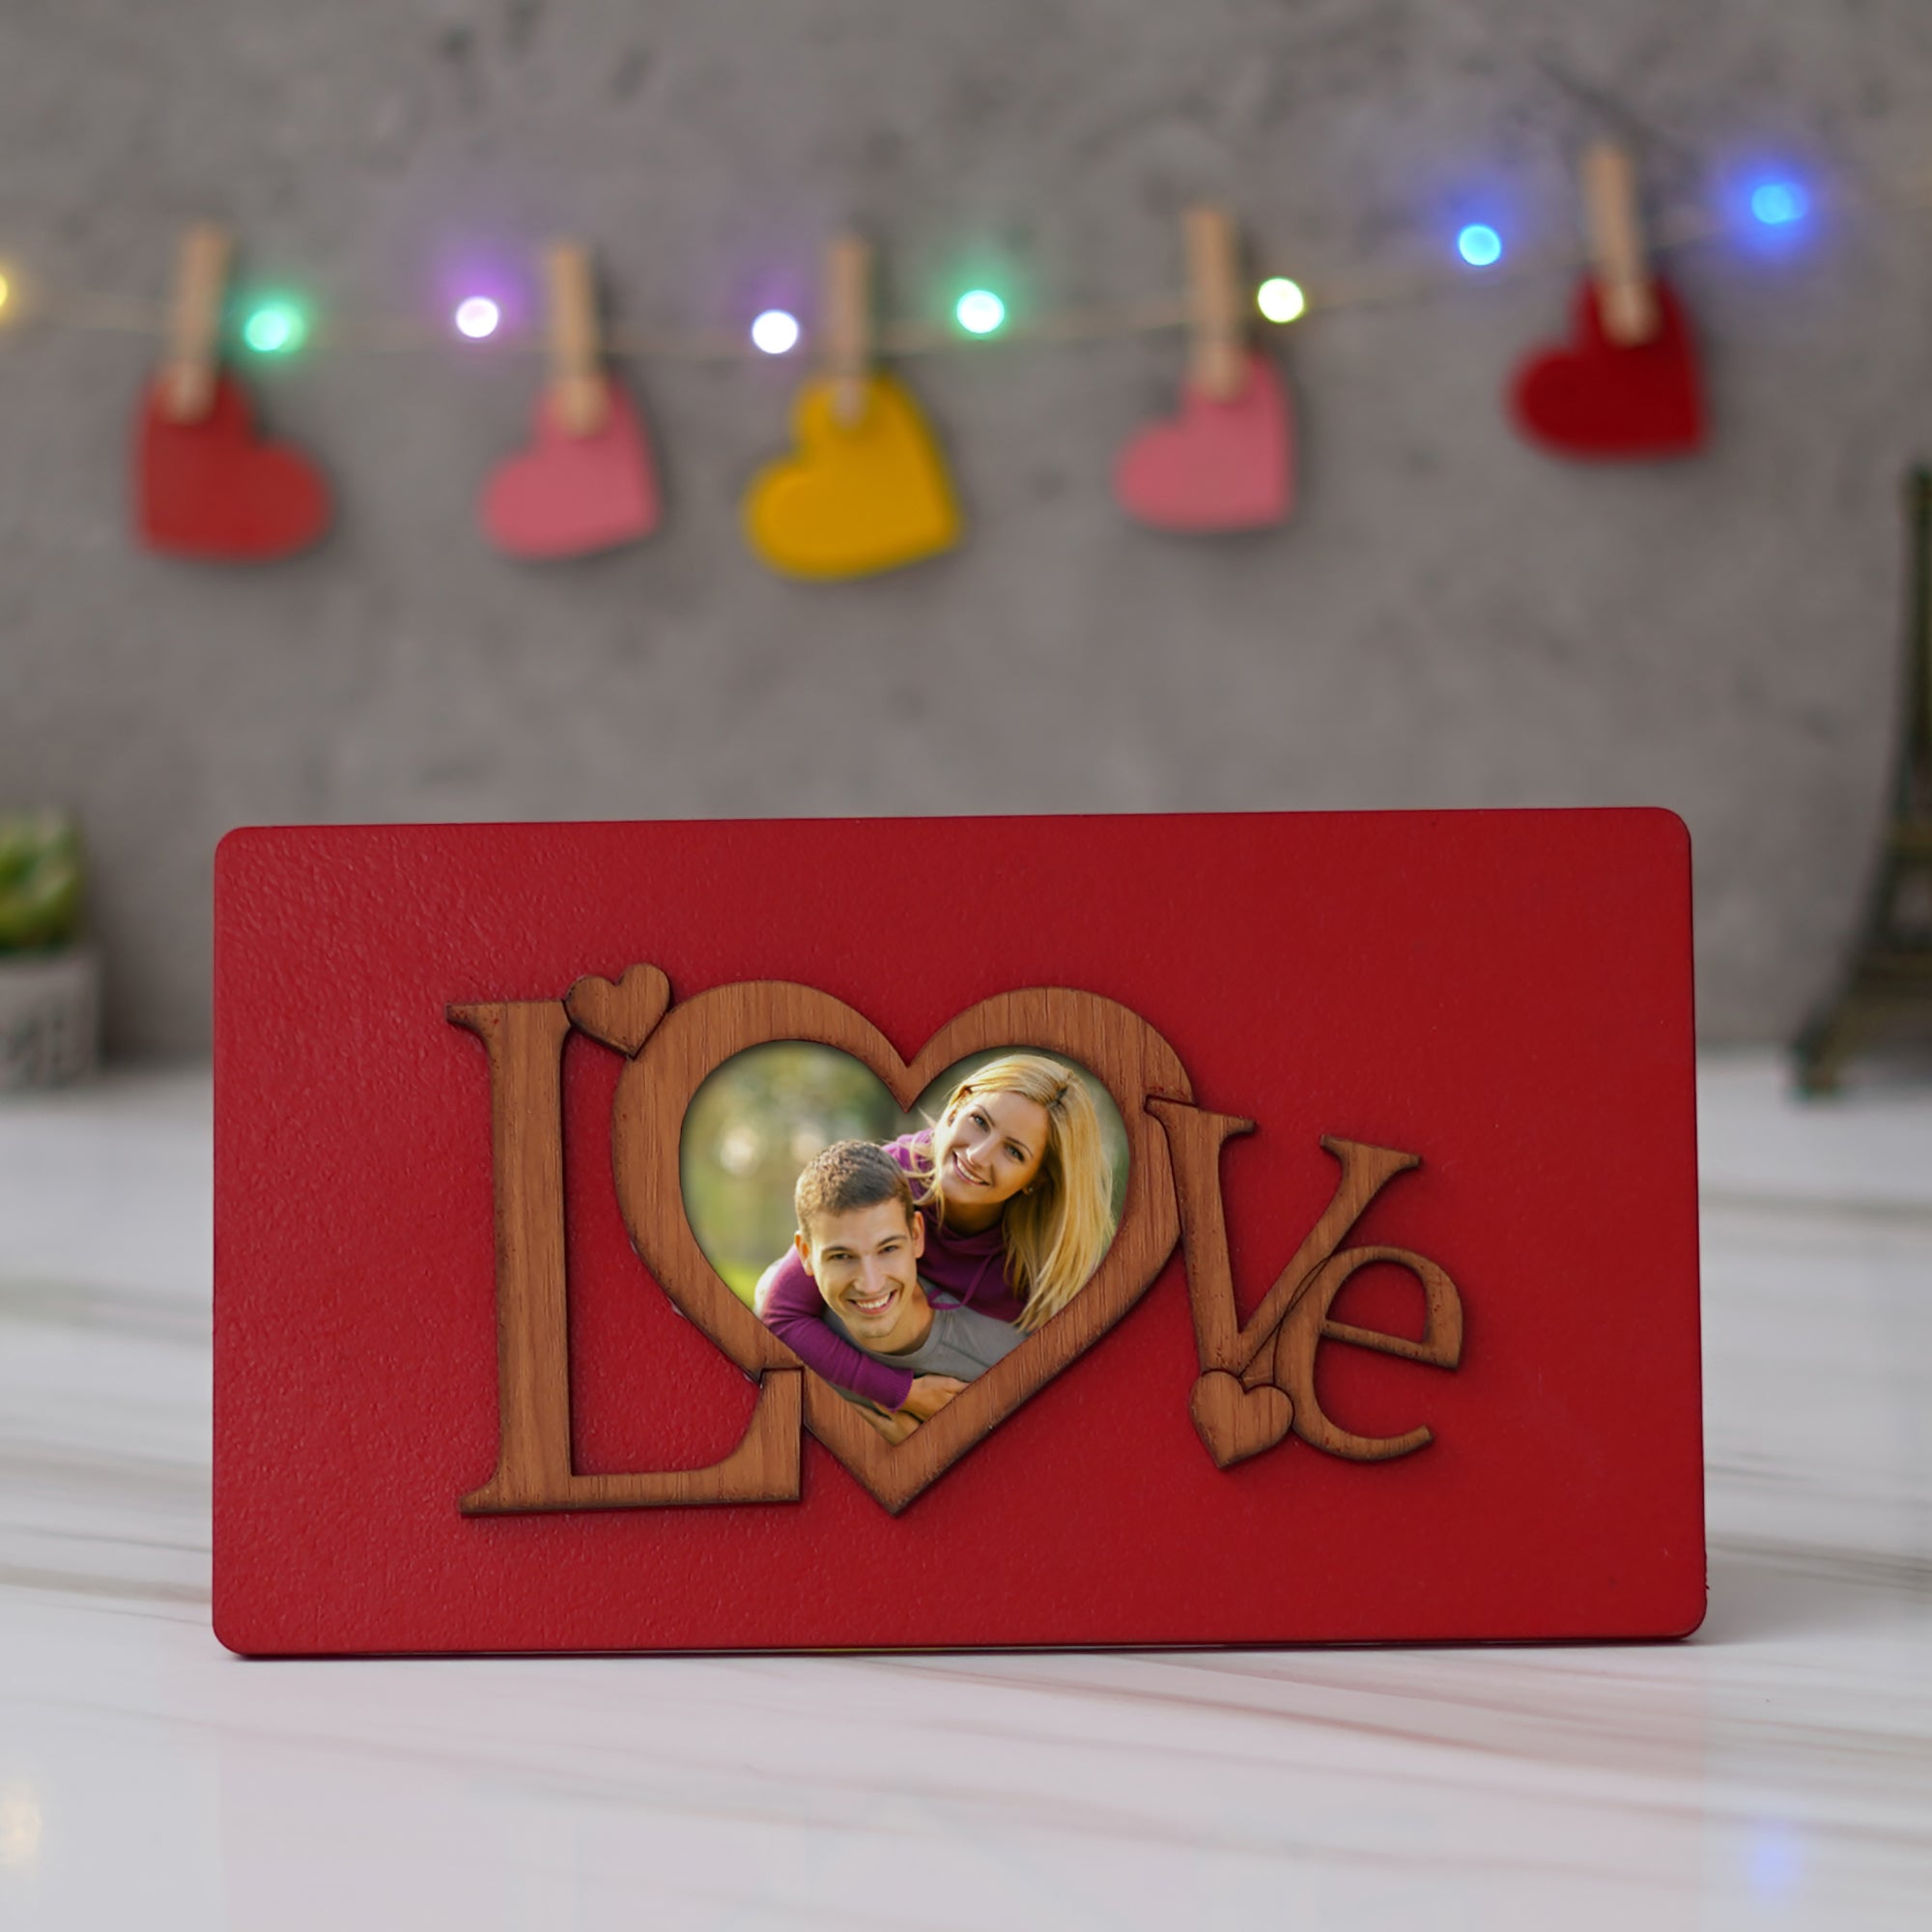 Valentine Combo of "Love" Wooden Photo Frame With Red Stand, Red Heart Shaped Gift Box 1